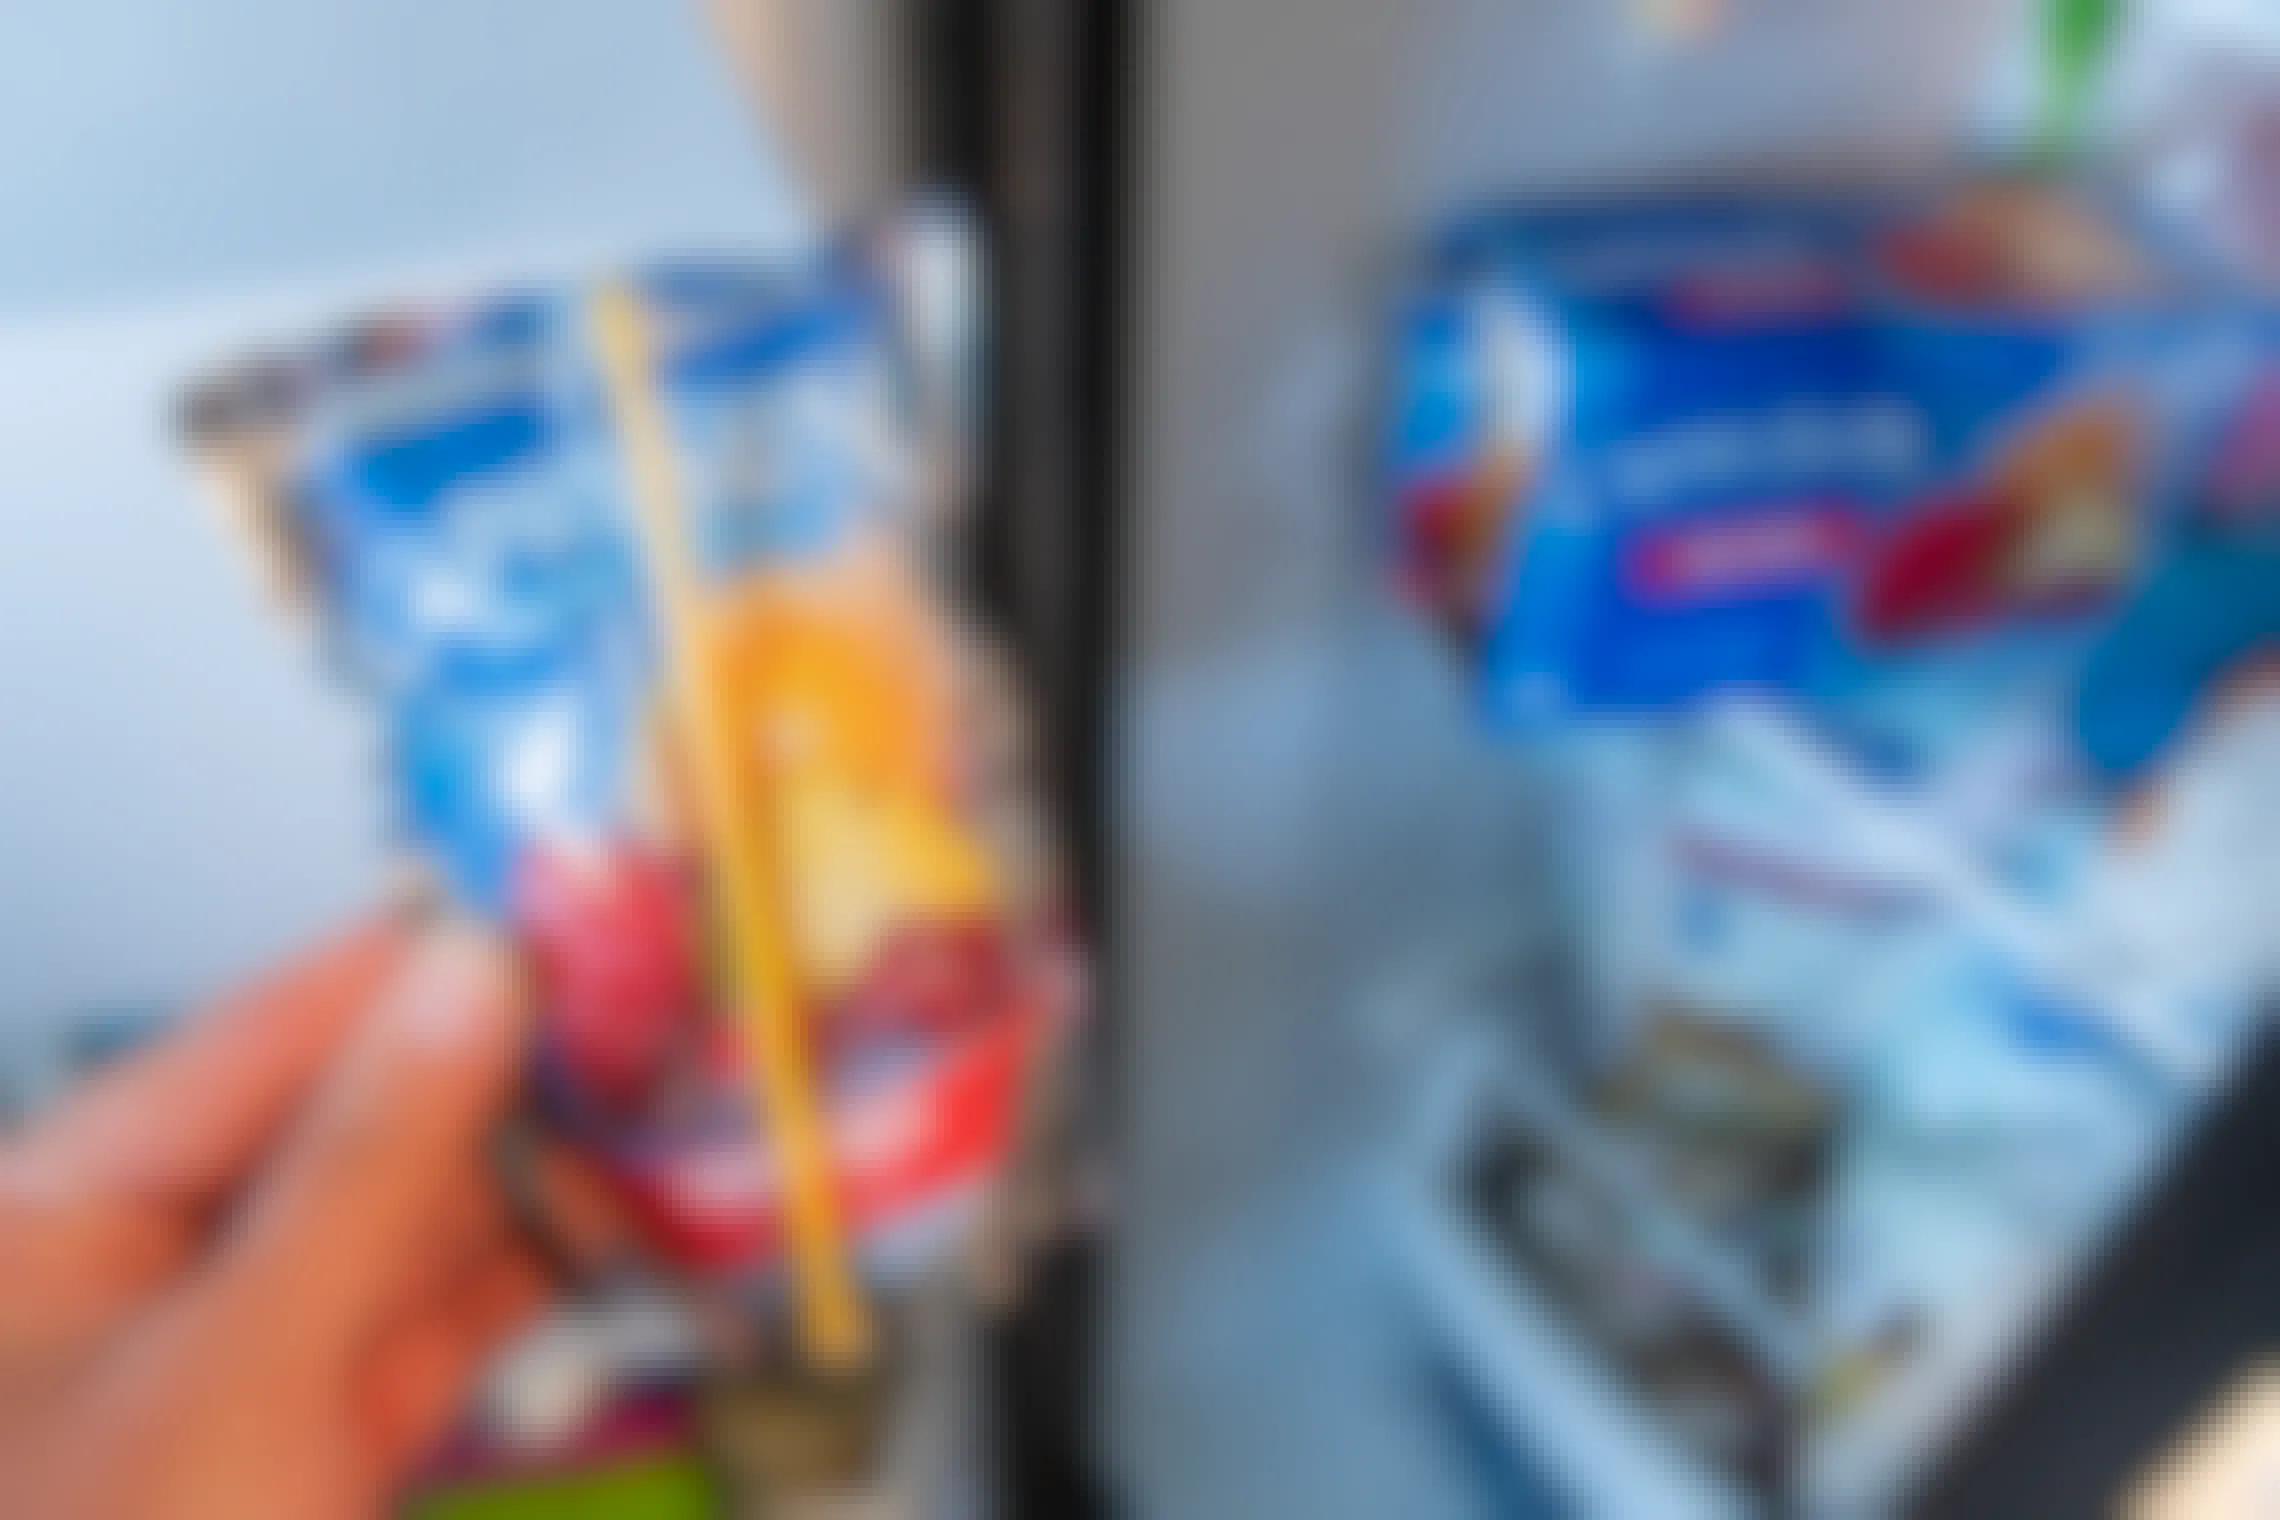 A person's hand holding a frozen CapriSun pouch next to a box of more CapriSun pouches sitting on a shelf in a freezer.